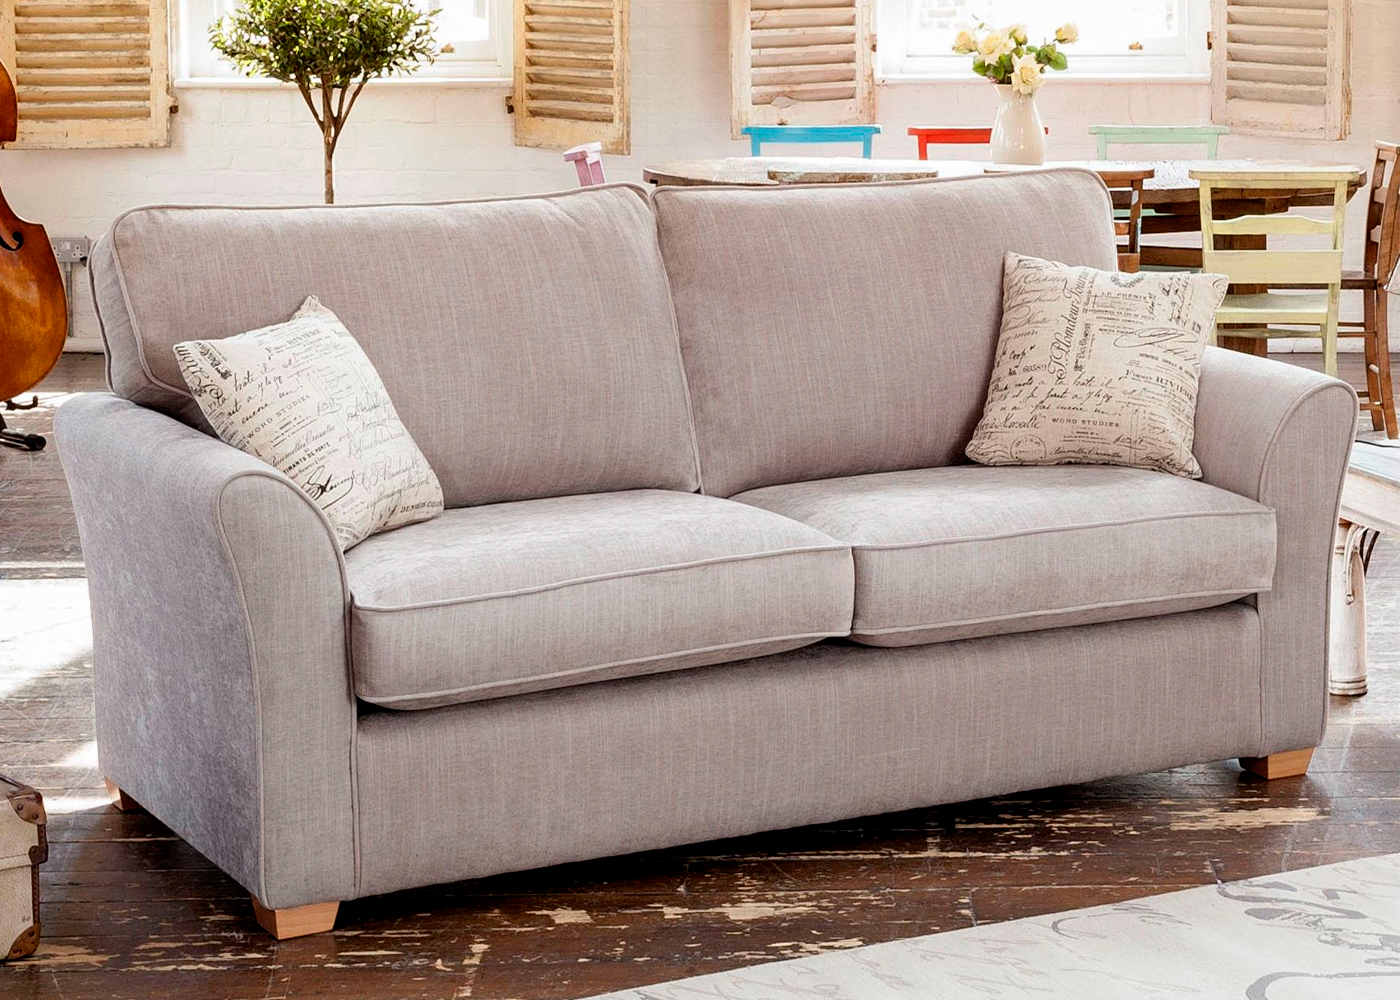 alstons spitfire 3 seater sofa bed